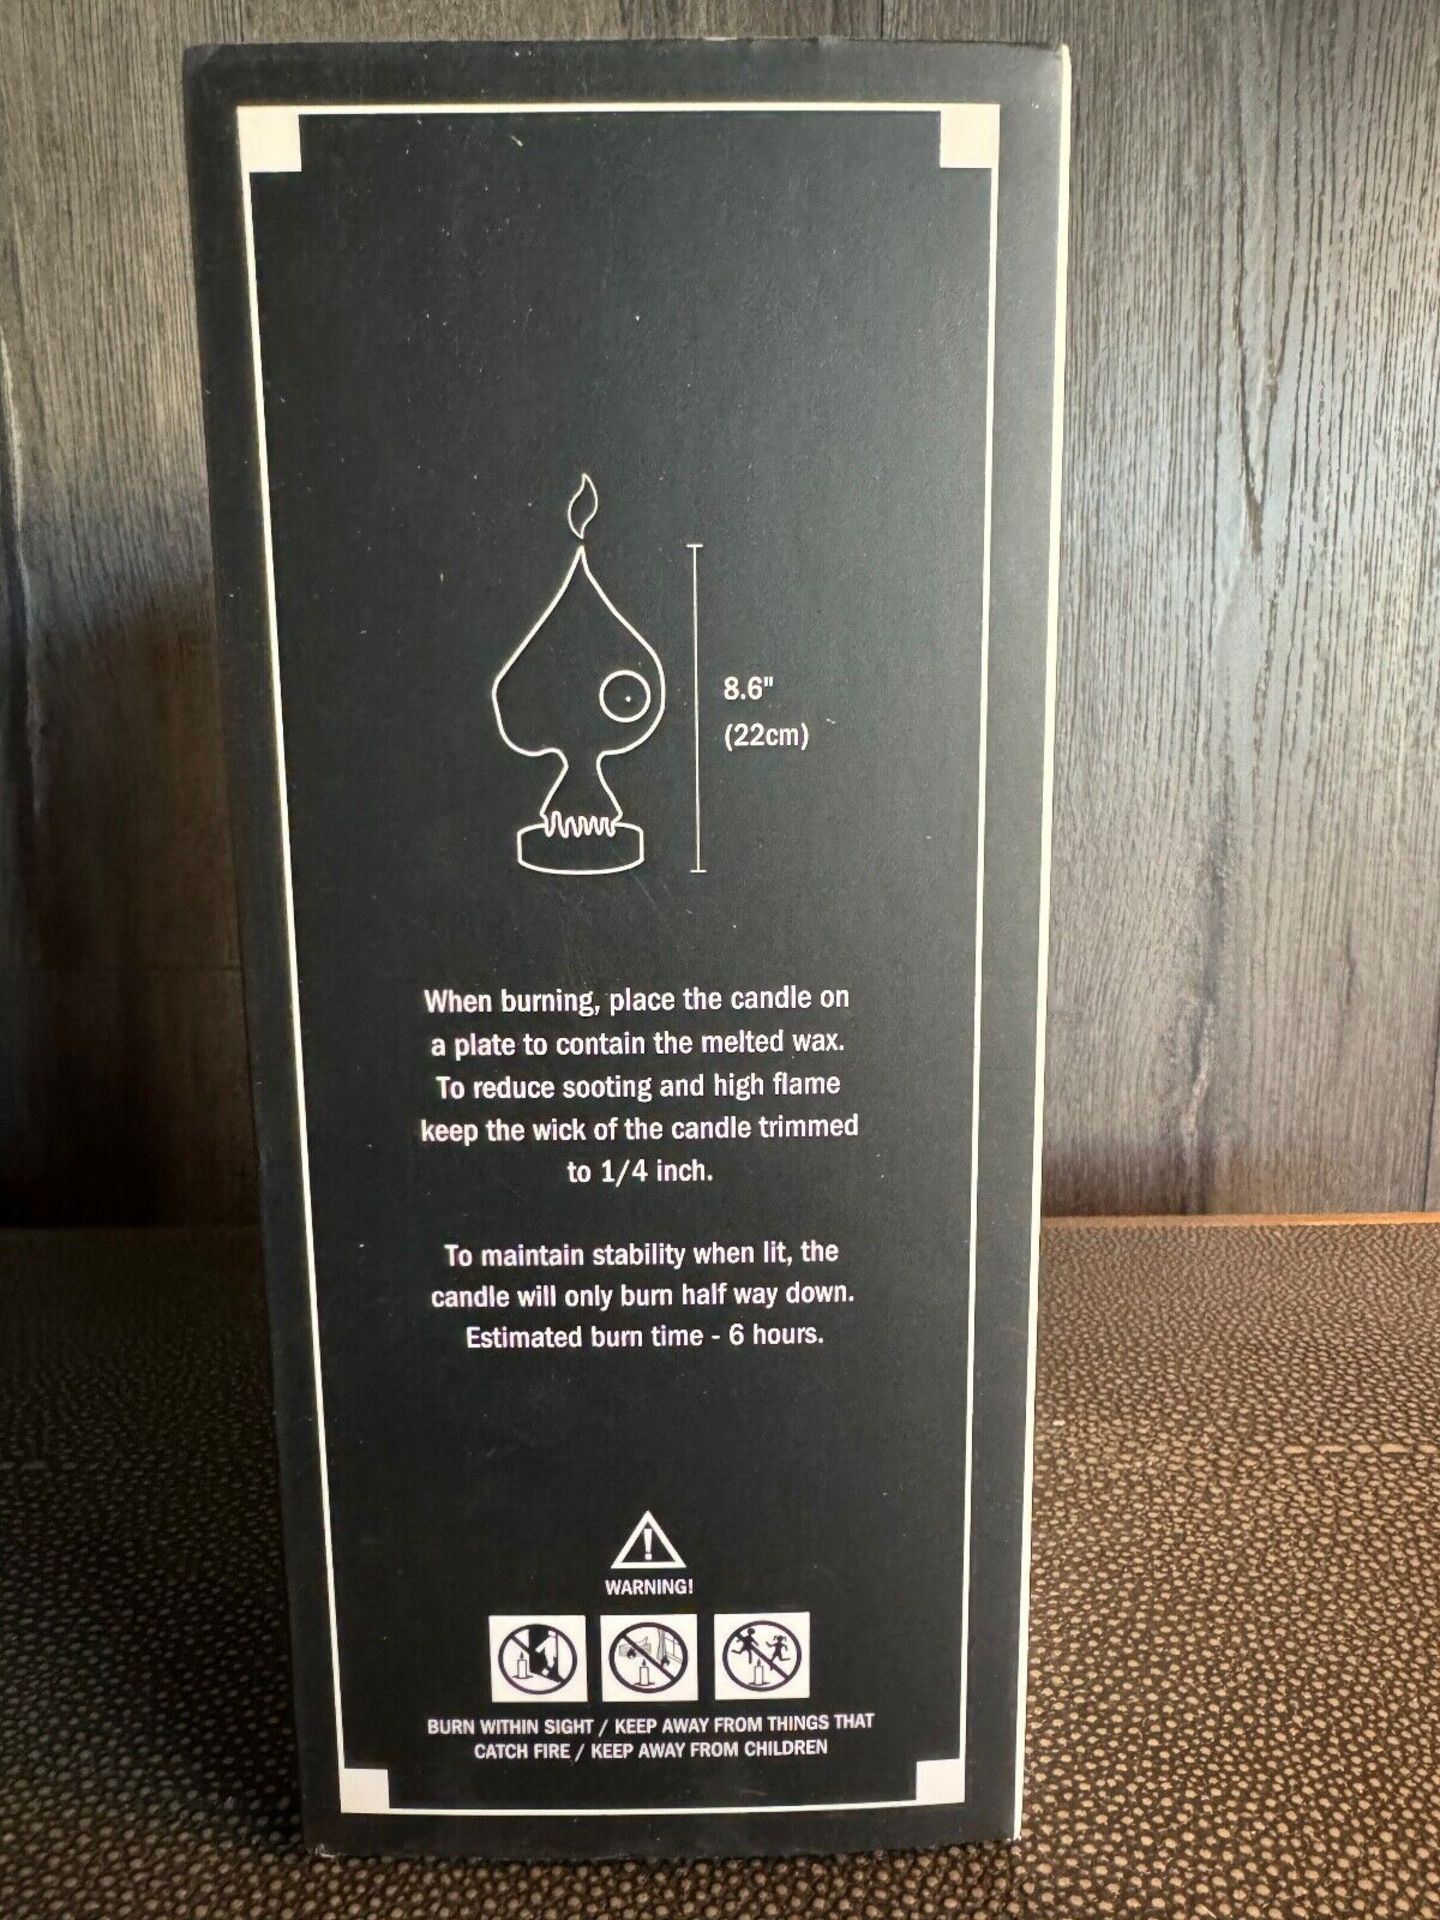 35 PIECES OF Tim Burton Spade Candle Lost Vegas Exhibit Exclusive Limited Edition Of 3000 - Image 4 of 5